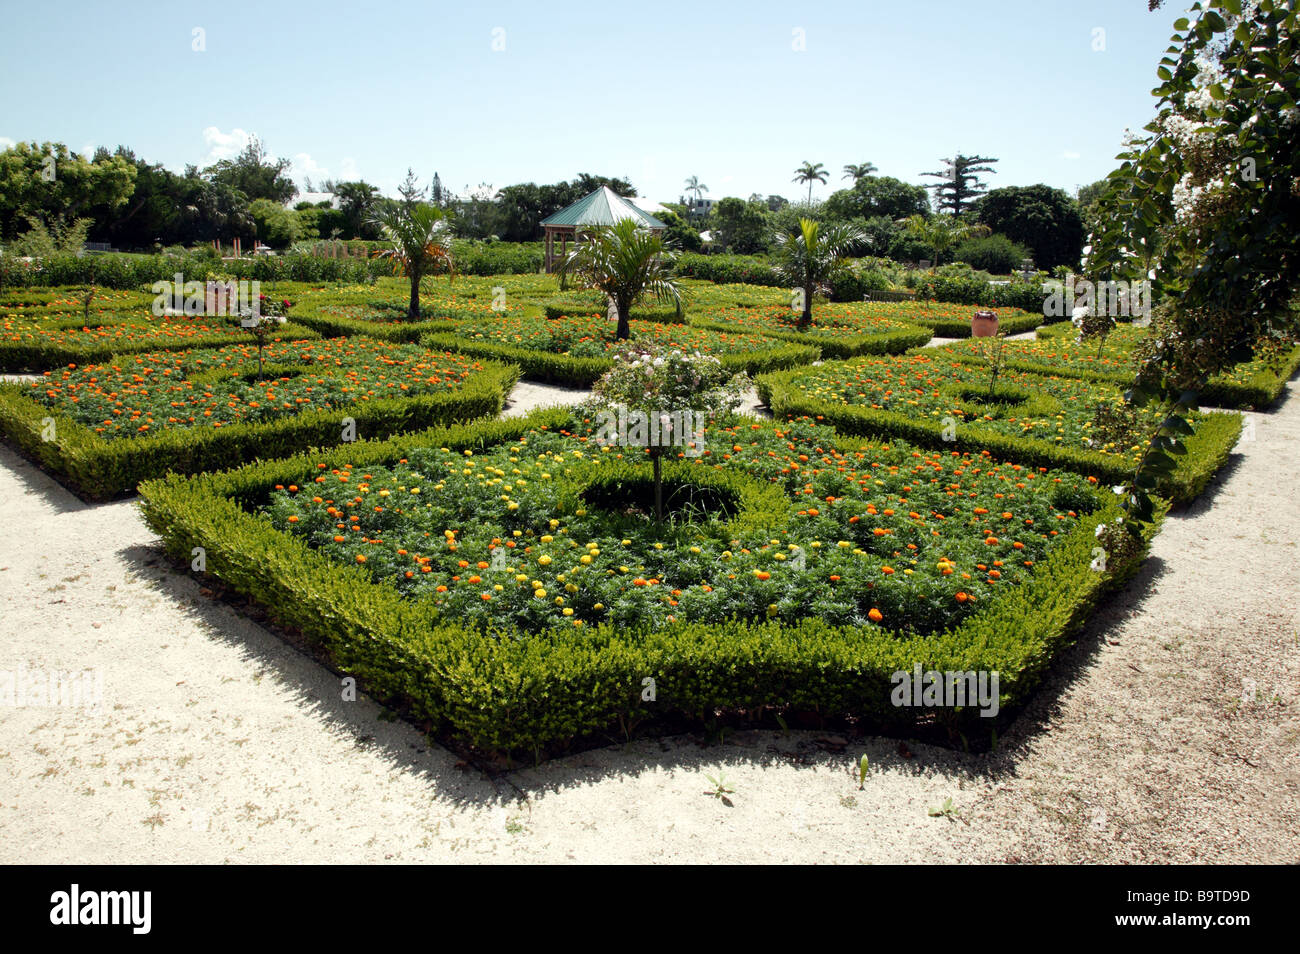 View Of The Newly Opened 17th Century Style English Parterre